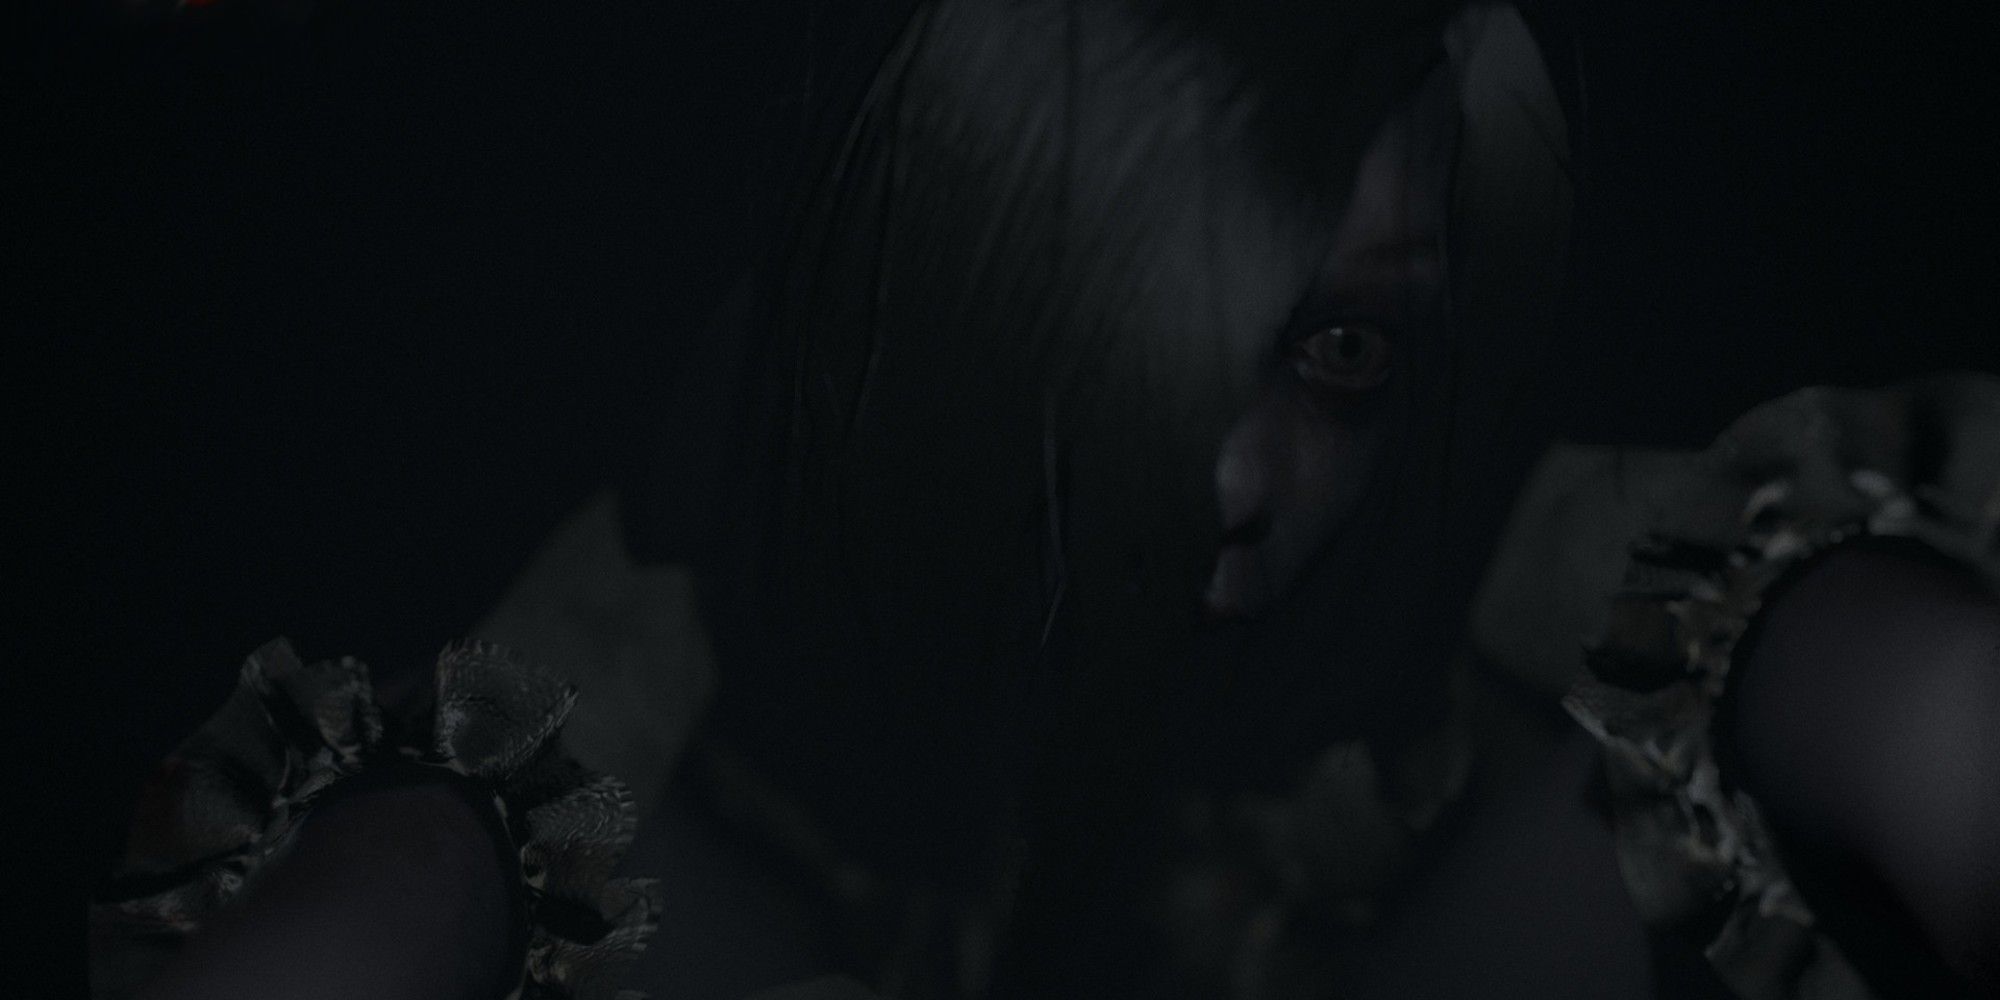 Lucy grabs the player in Visage